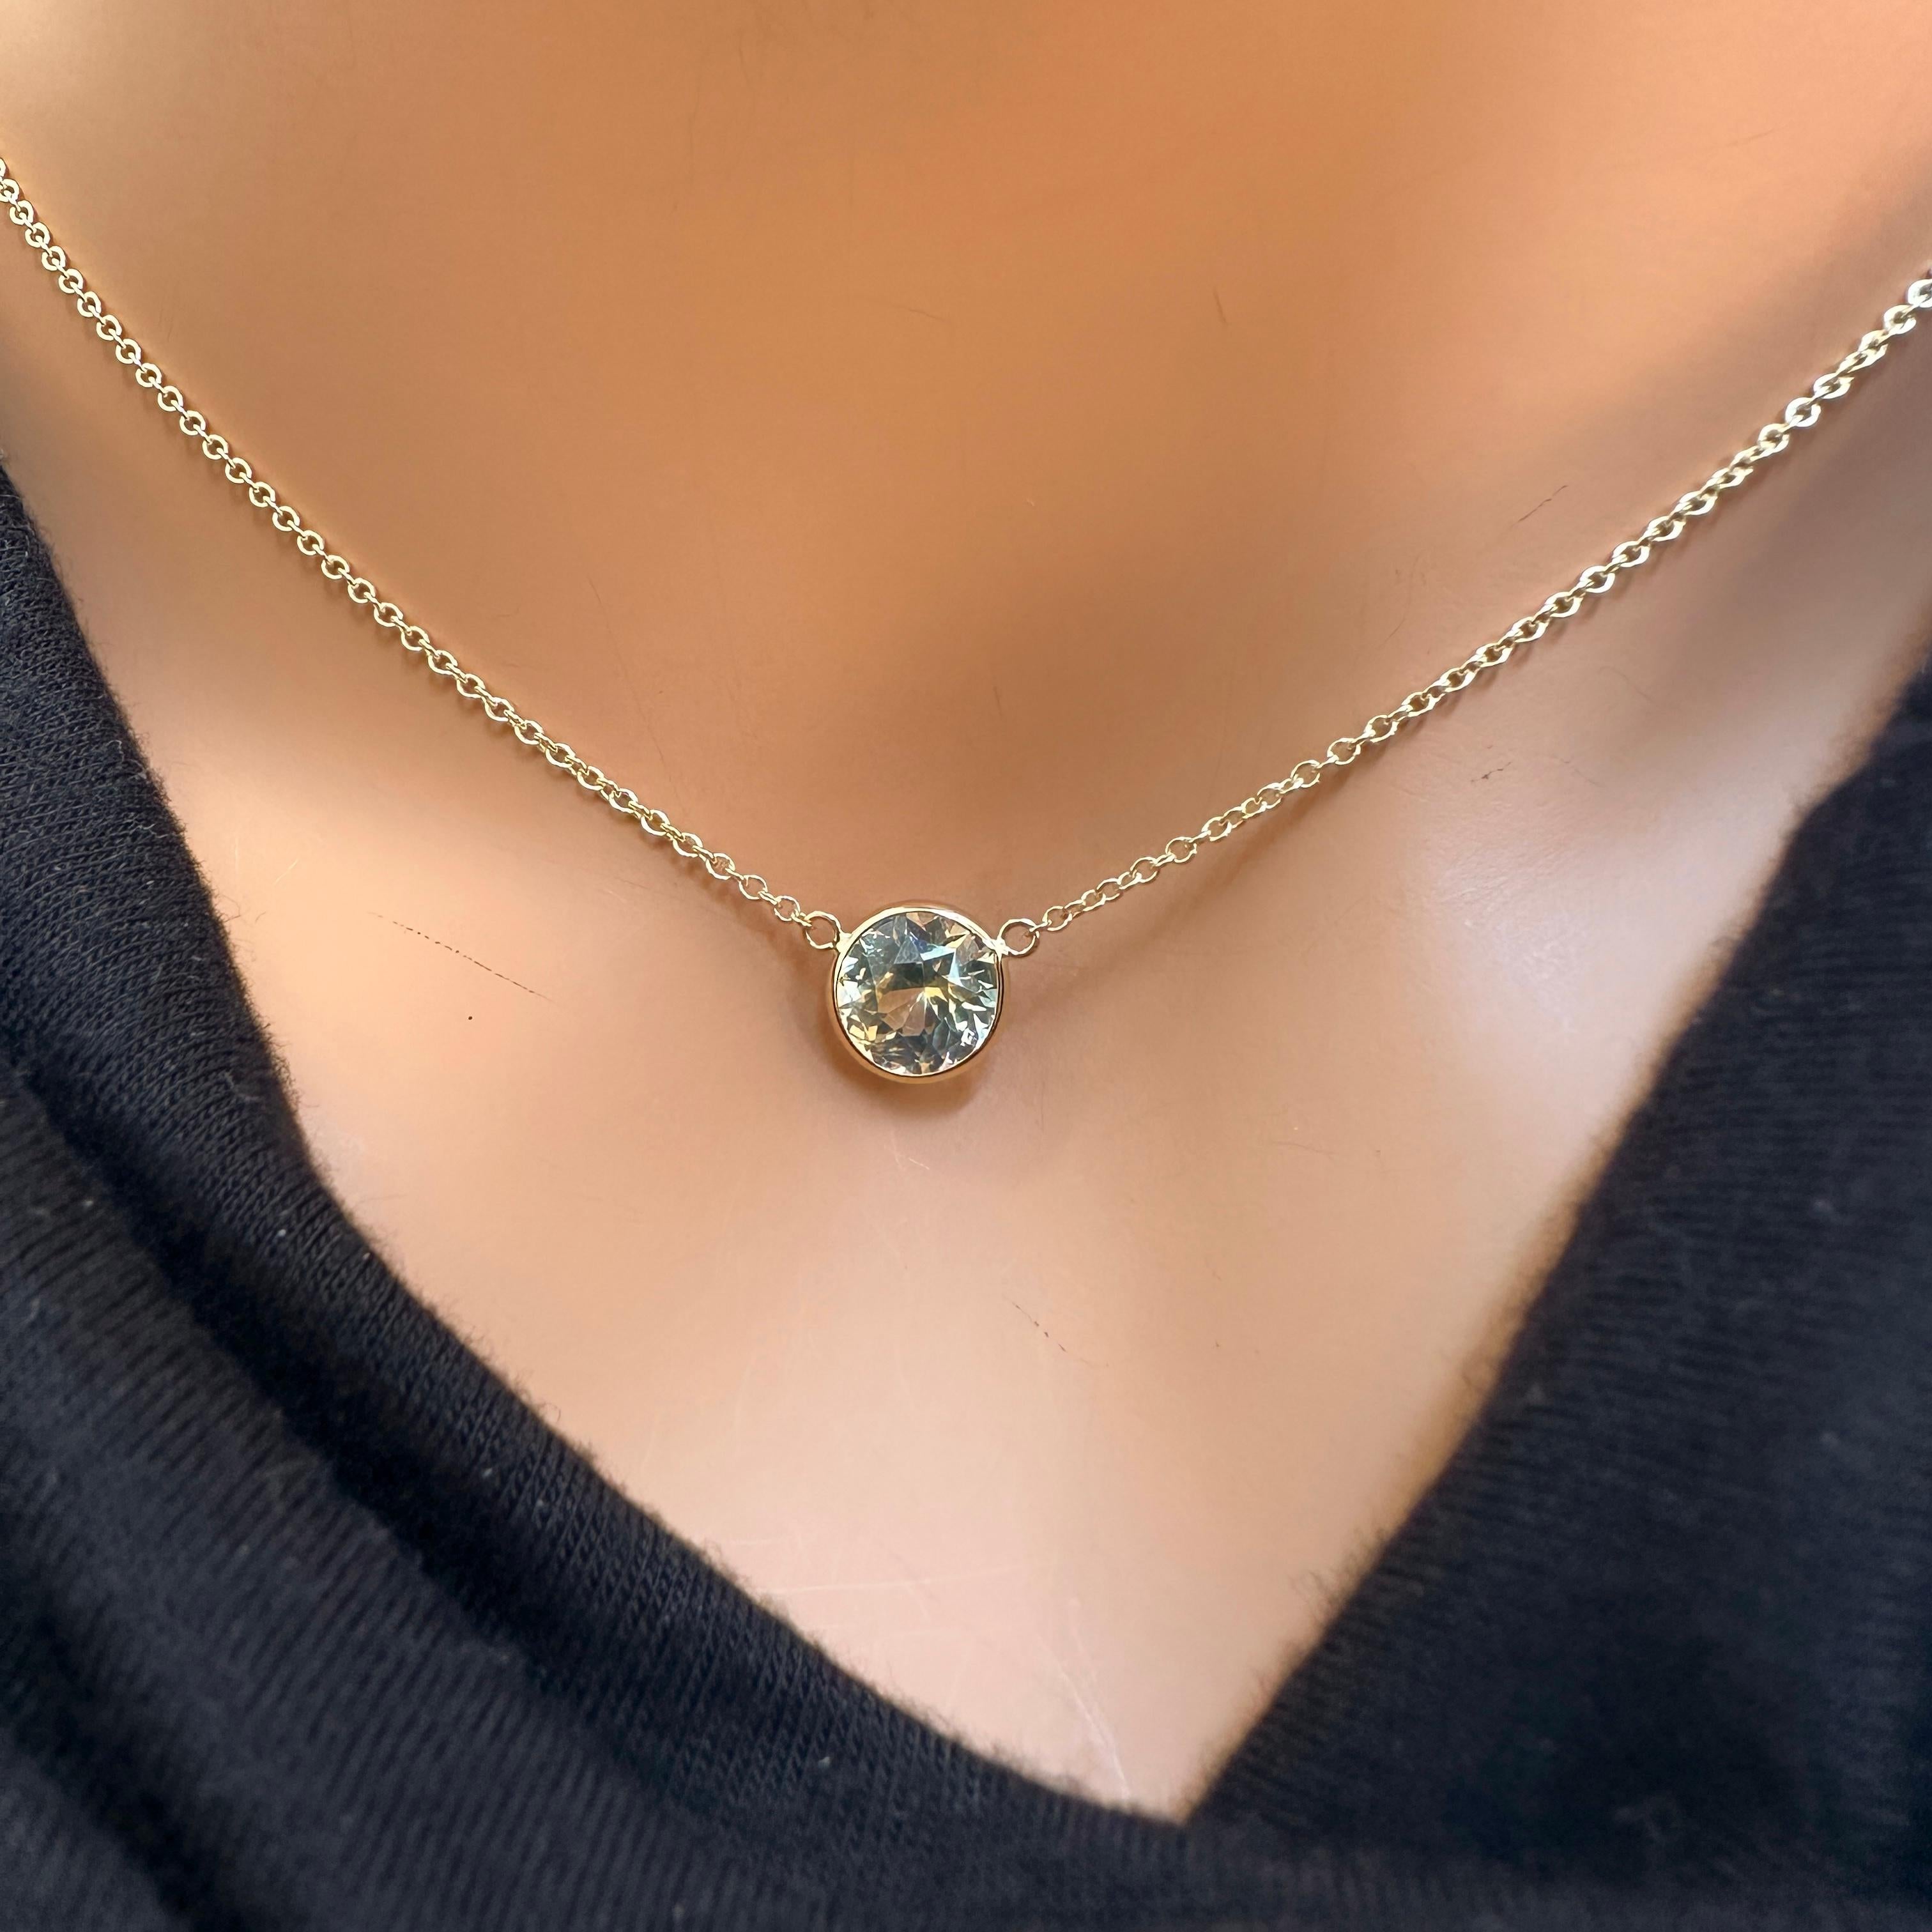 A fashion necklace made of 14k yellow gold with a main stone of a certified round yellow sapphire weighing 2.35 carats would be a stunning choice. Yellow sapphires are known for their vibrant yellow color and durability, making them an excellent